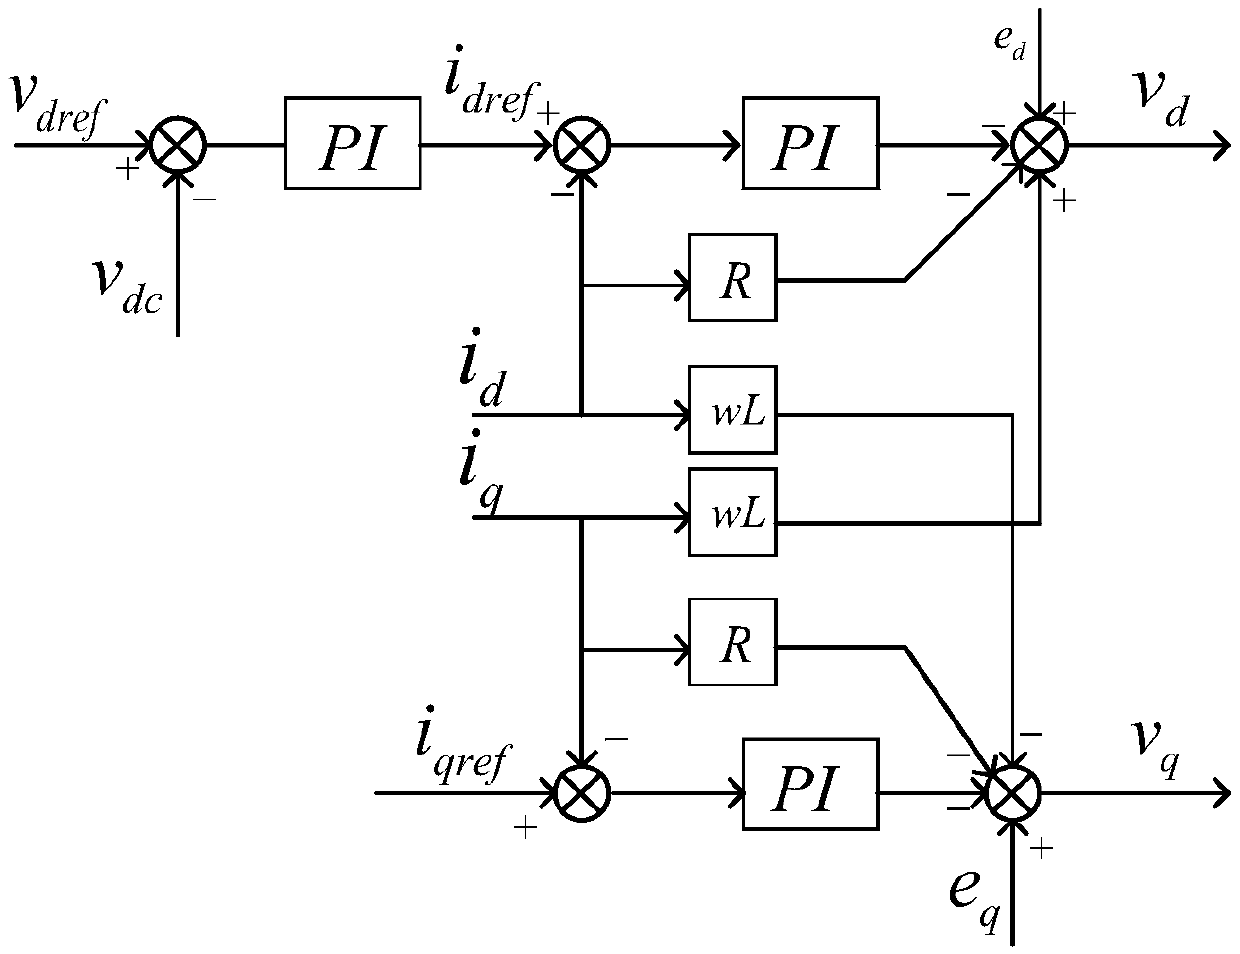 Chaotic particle swarm multi-objective optimization method based on three-phase three-switch two-level rectifier